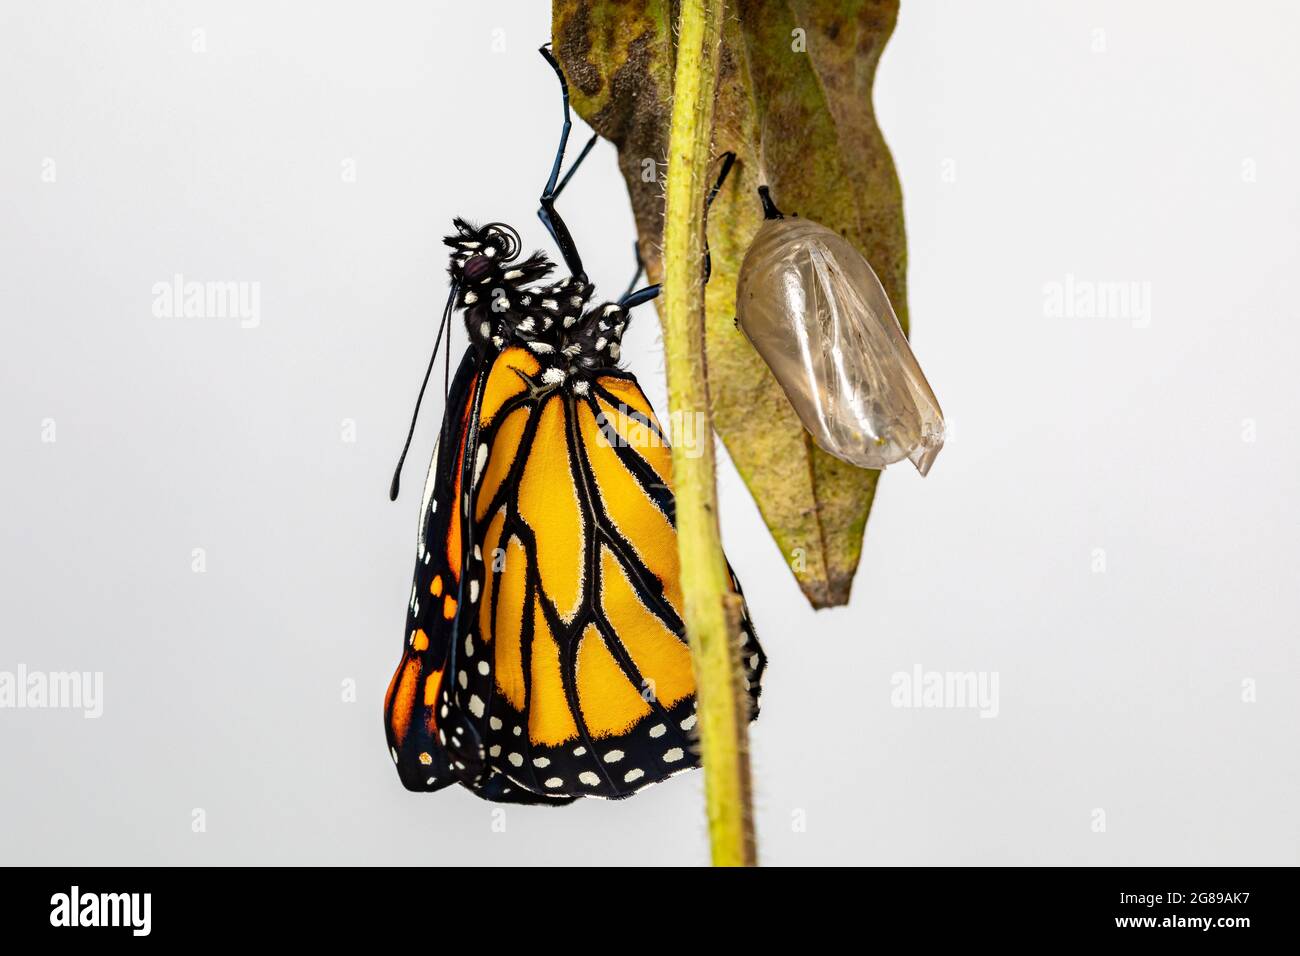 Monarch butterfly just emerged from chrysalis completing the metamorphosis. Concept of butterfly conservation, life cycle, habitat preservation, and b Stock Photo